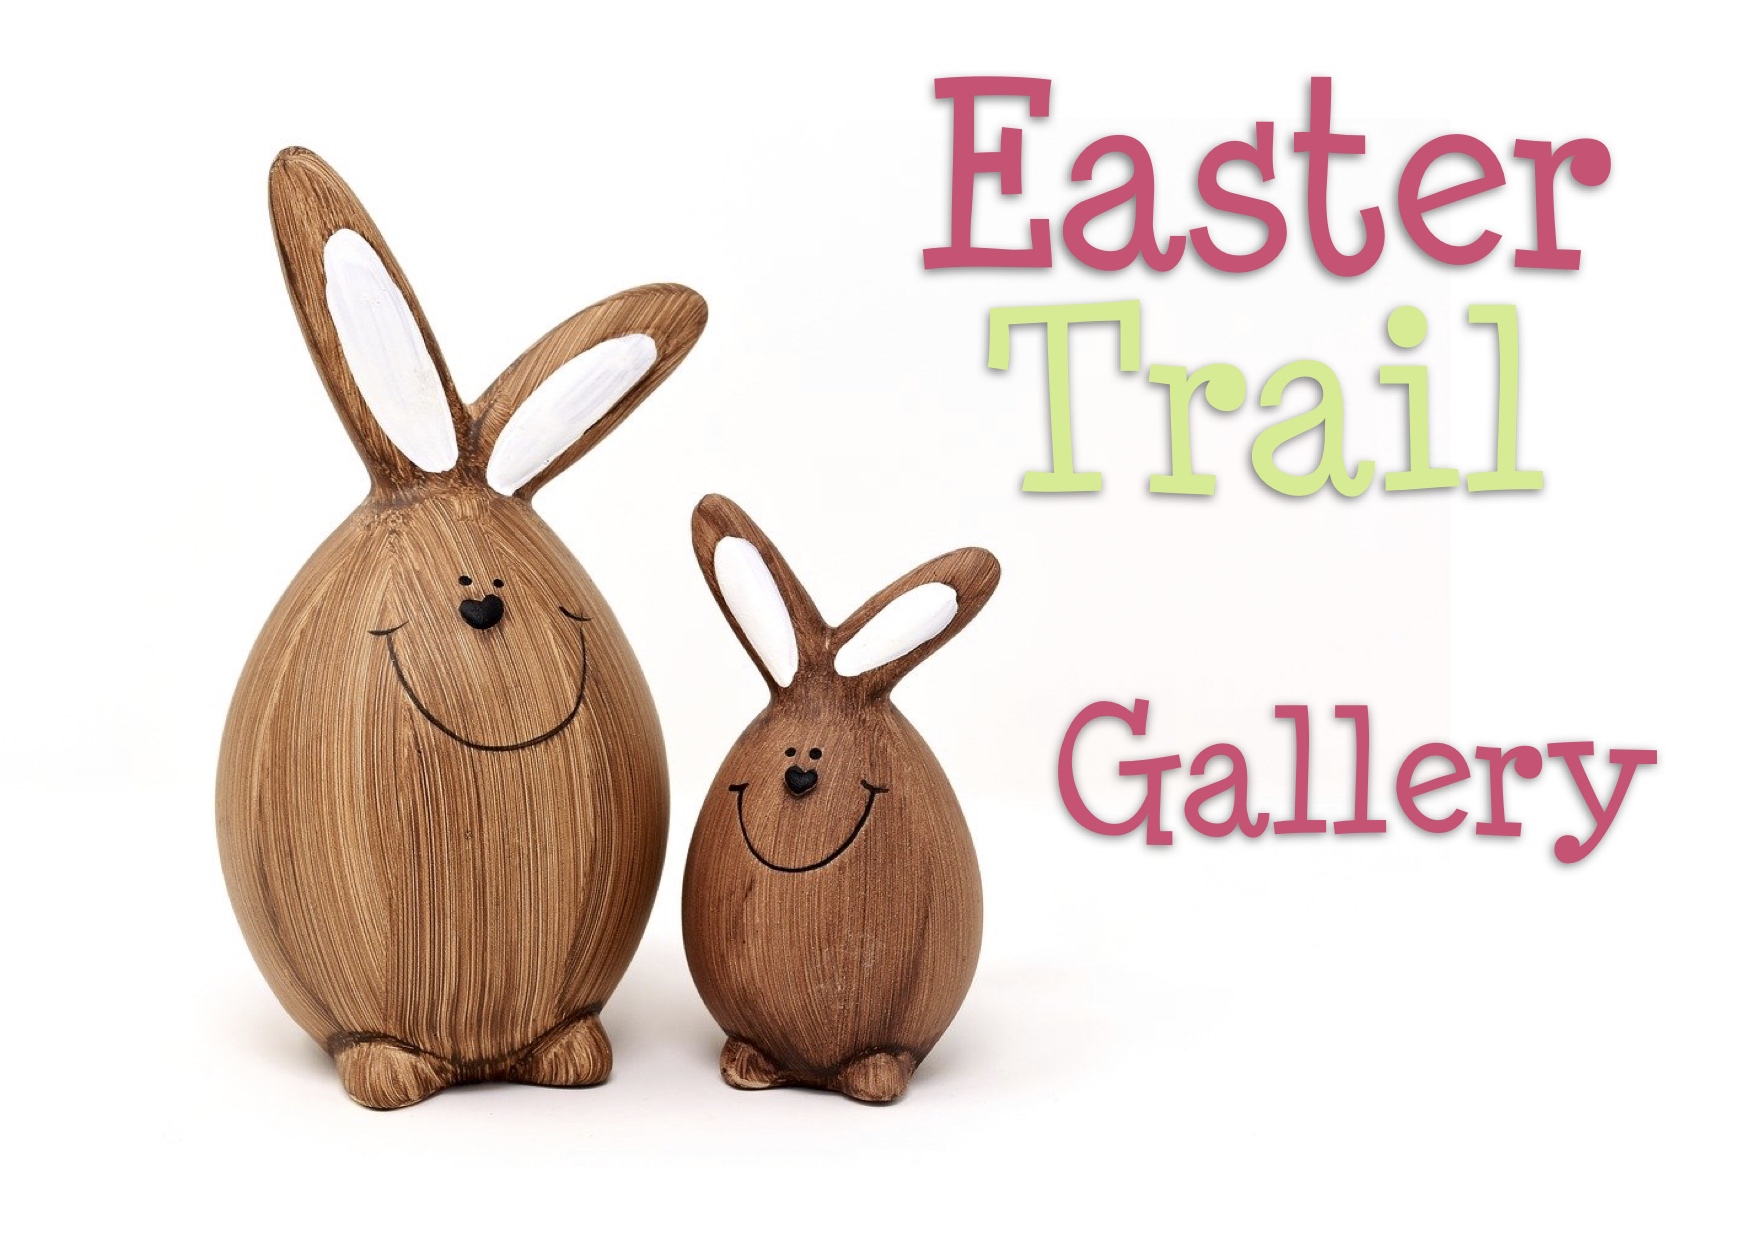 Easter Trail Gallery